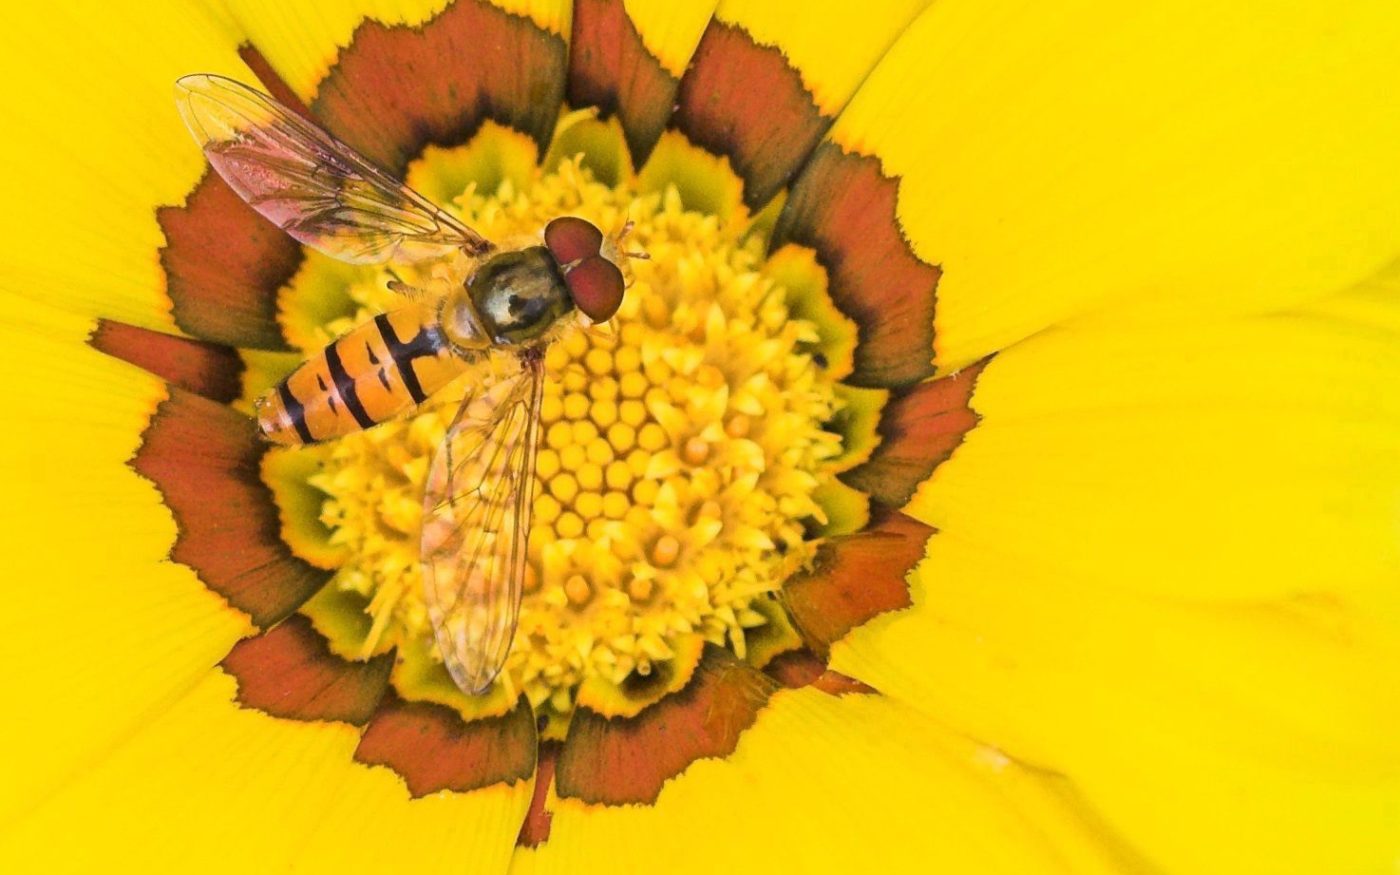 Composition in yellow and red, wasp on a yellow flower